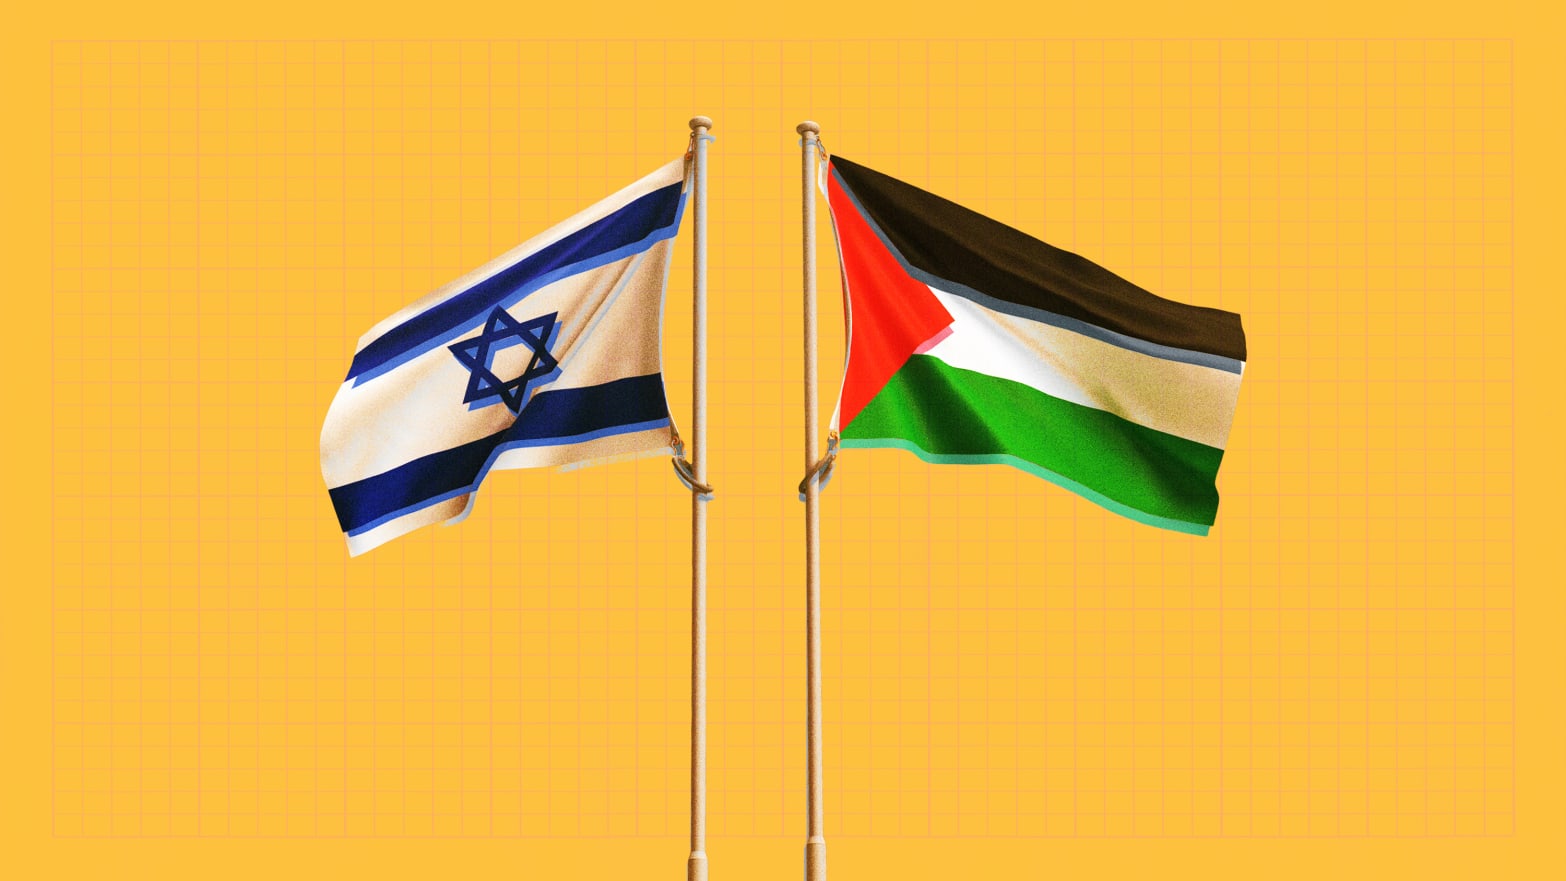 A photo illustration of the flags of Israel and Palestine.